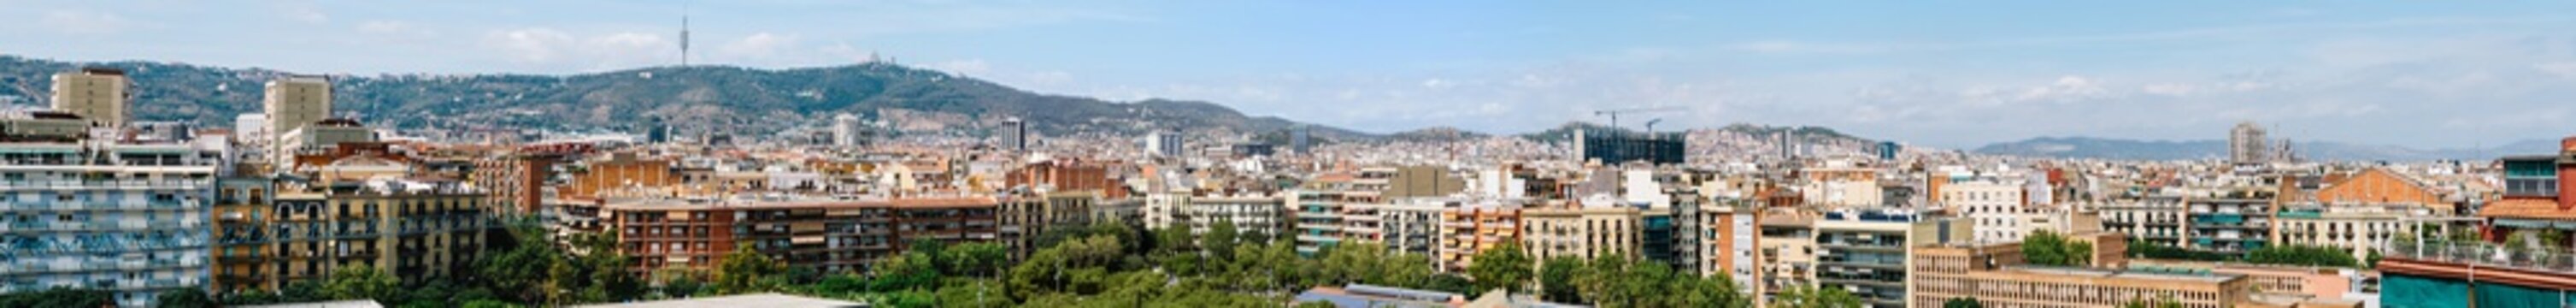 100 Megapixel Aerial Panoramic View Of Downtown Barcelona City In Spain